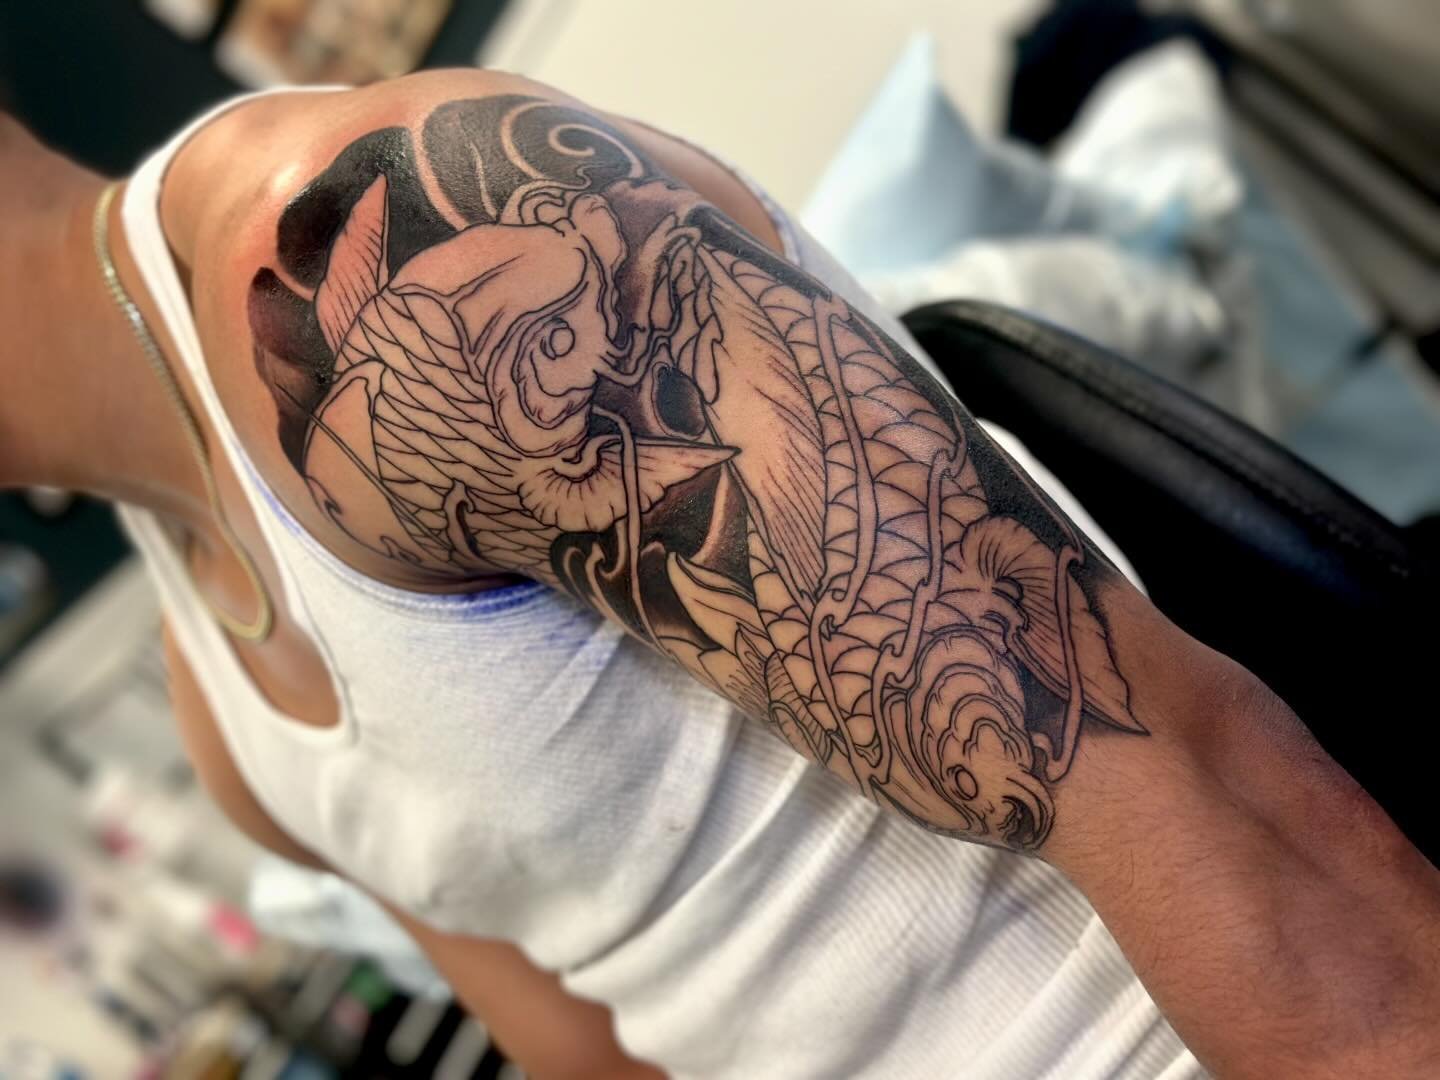 Koi fish tattoo Japanese style 1st session, can't wait to finish the half sleeve project 🙏🙏

#koifishtattoo #japanesetattoo #tattooshop #tattooartist #tattoo #tattooist #tattooshop #koifishtattoodesign #japanesetattoo #gwinnetttattoo #gwinnetttatto